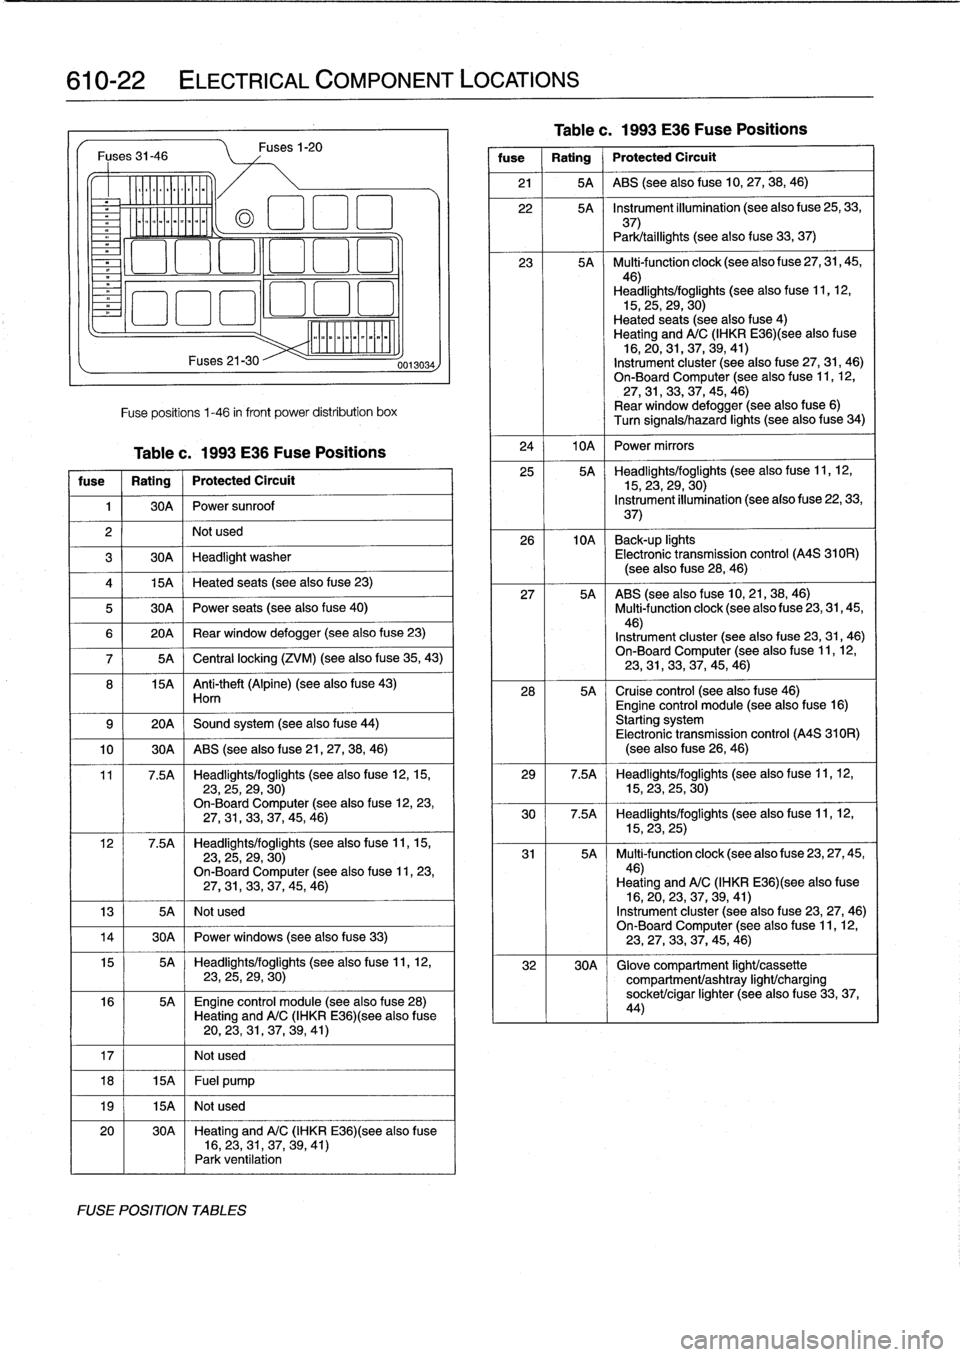 BMW 318i 1997 E36 Owners Manual 
610-22

	

ELECTRICAL
COMPONENT
LOCATIONS

Fuses
31-46

Ylililll

milililil
Fuses
21-30
Fuse
positions
1-46
in
front
Power
distribution
box

Table
c
.
1993
E36
Fuse
Positions

fuse

	

1
Rating

	

j